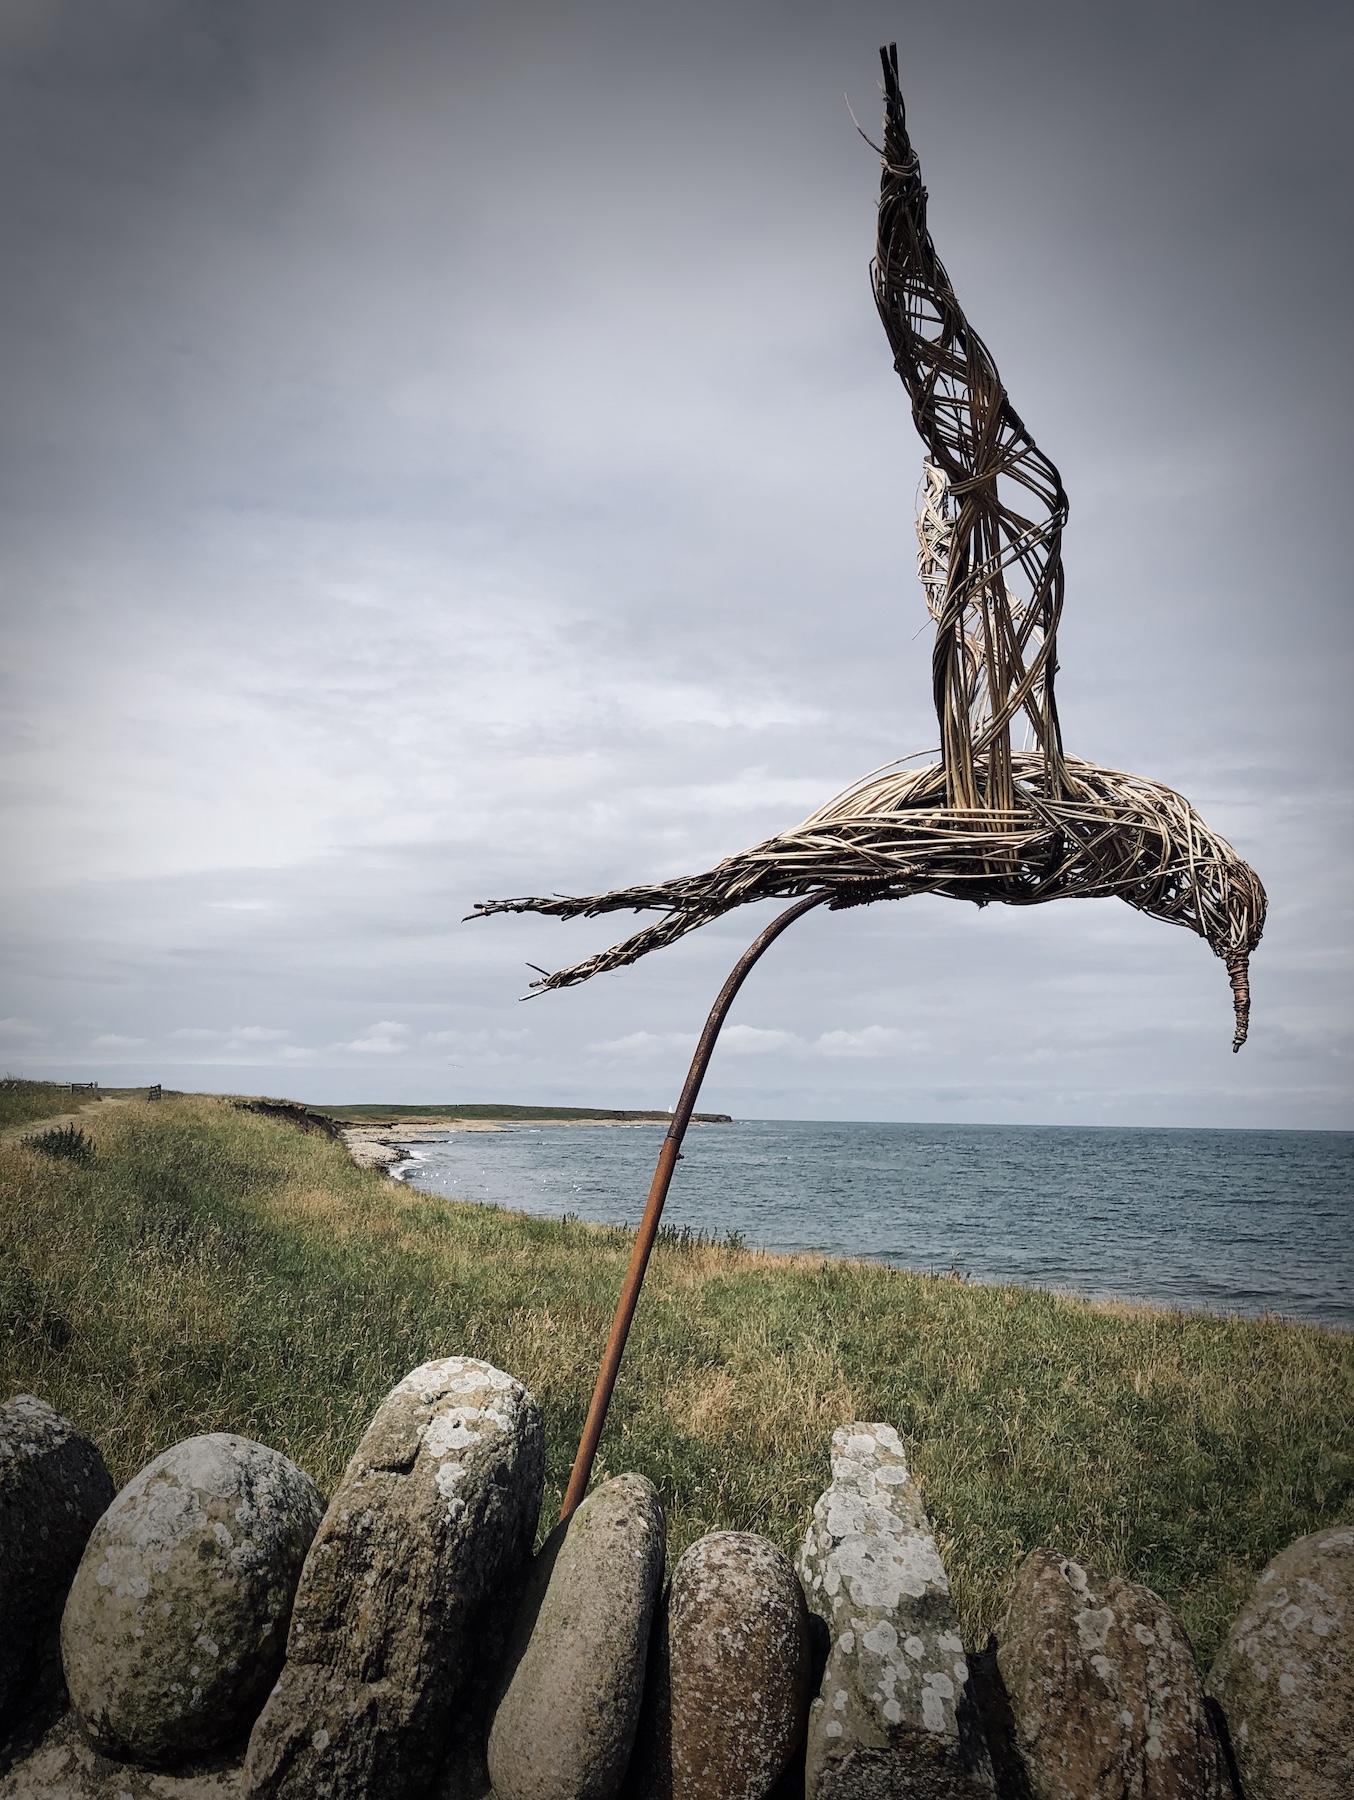 Wire sculpted bird in landscape of grass, stone wall, ocean, and grey cloudy sky